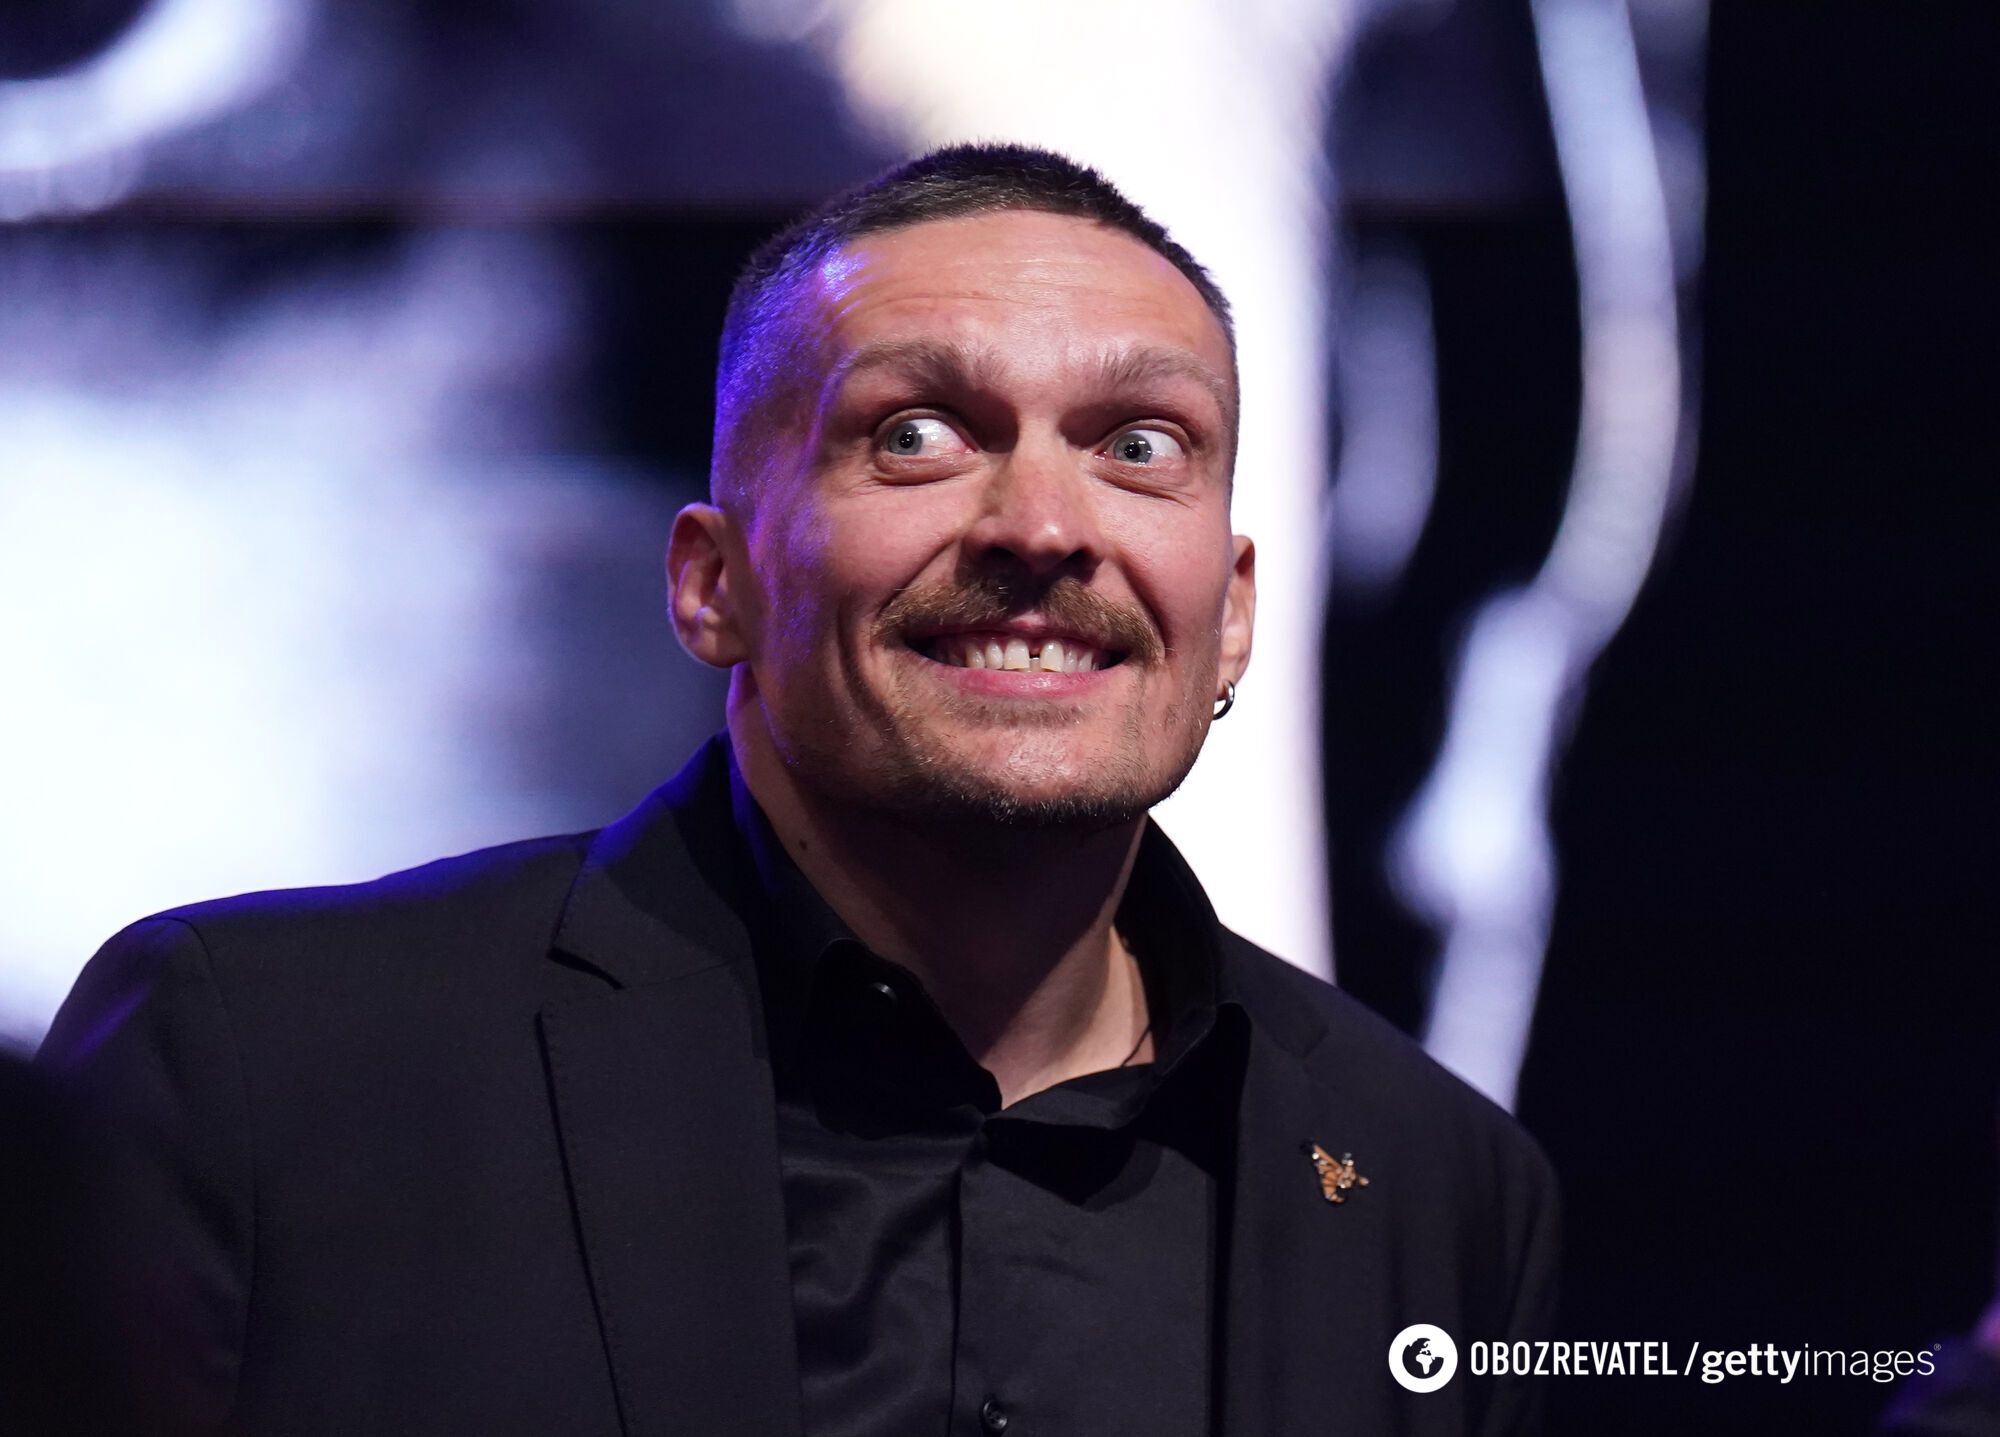 It became known who will show the Usyk–Fury fight in Ukraine and how much it will cost to watch